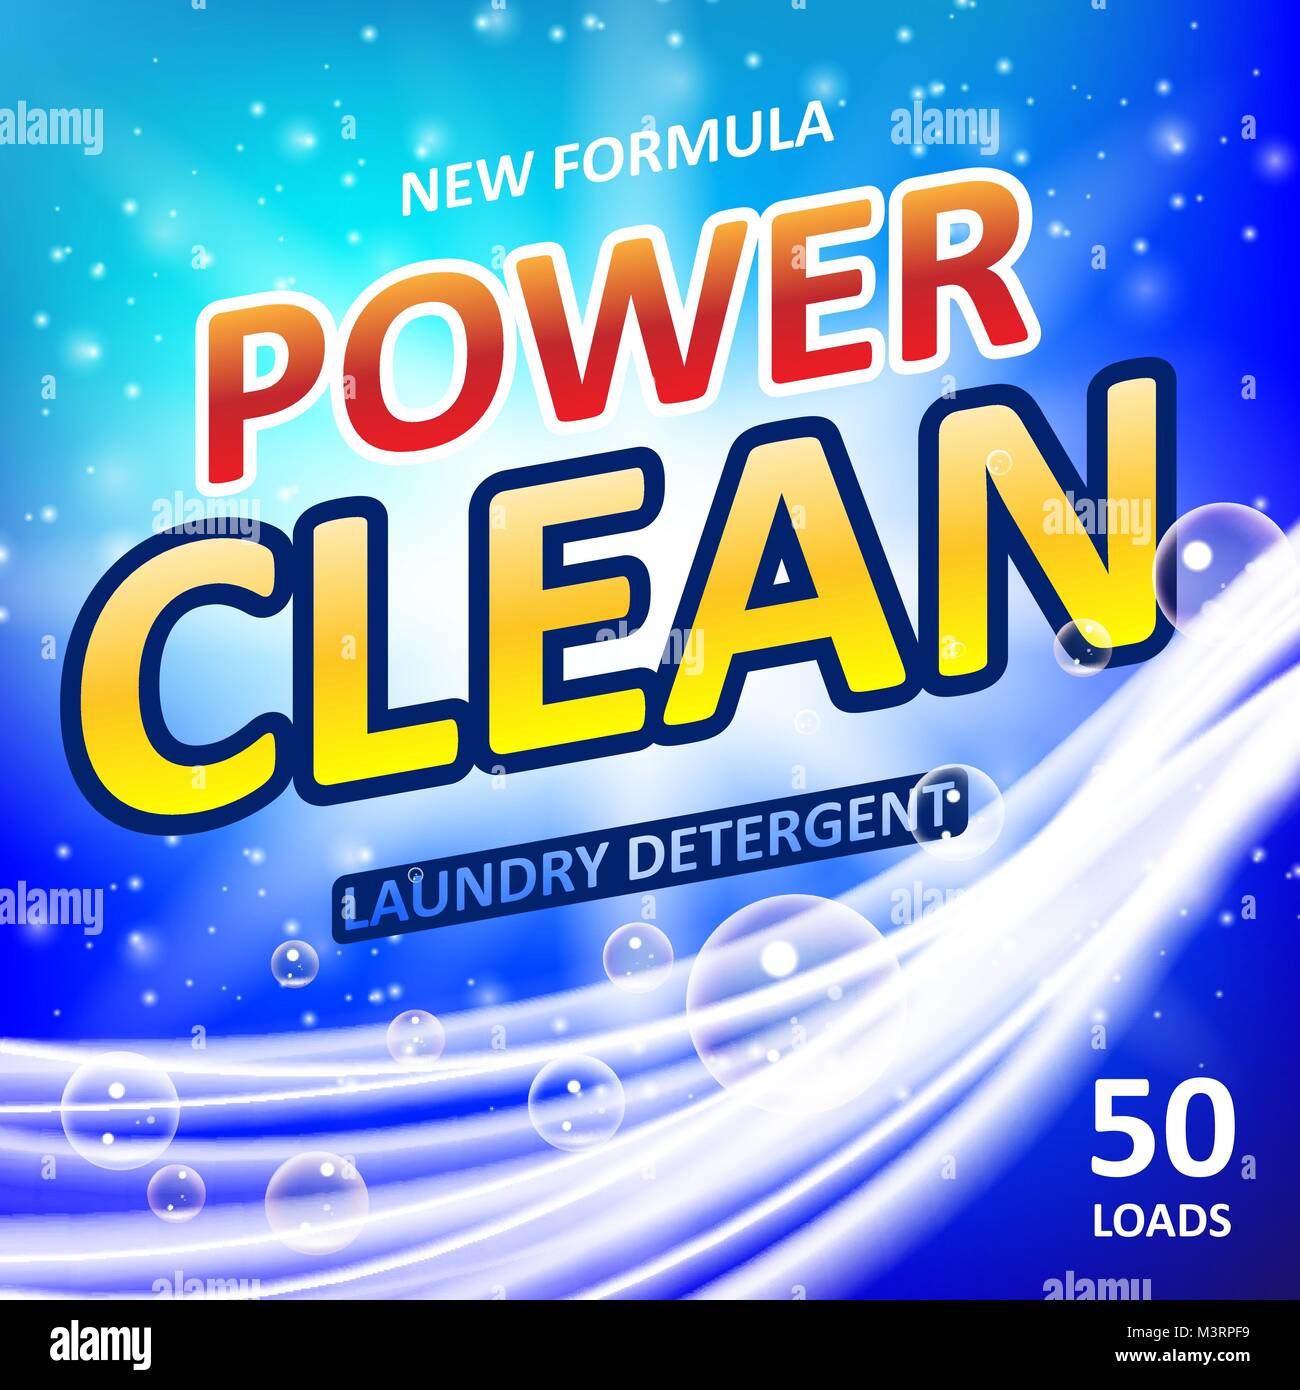 Power clean soap banner ads design. Washing Powder or Laundry detergent Package design. Vector illustration Stock Vector